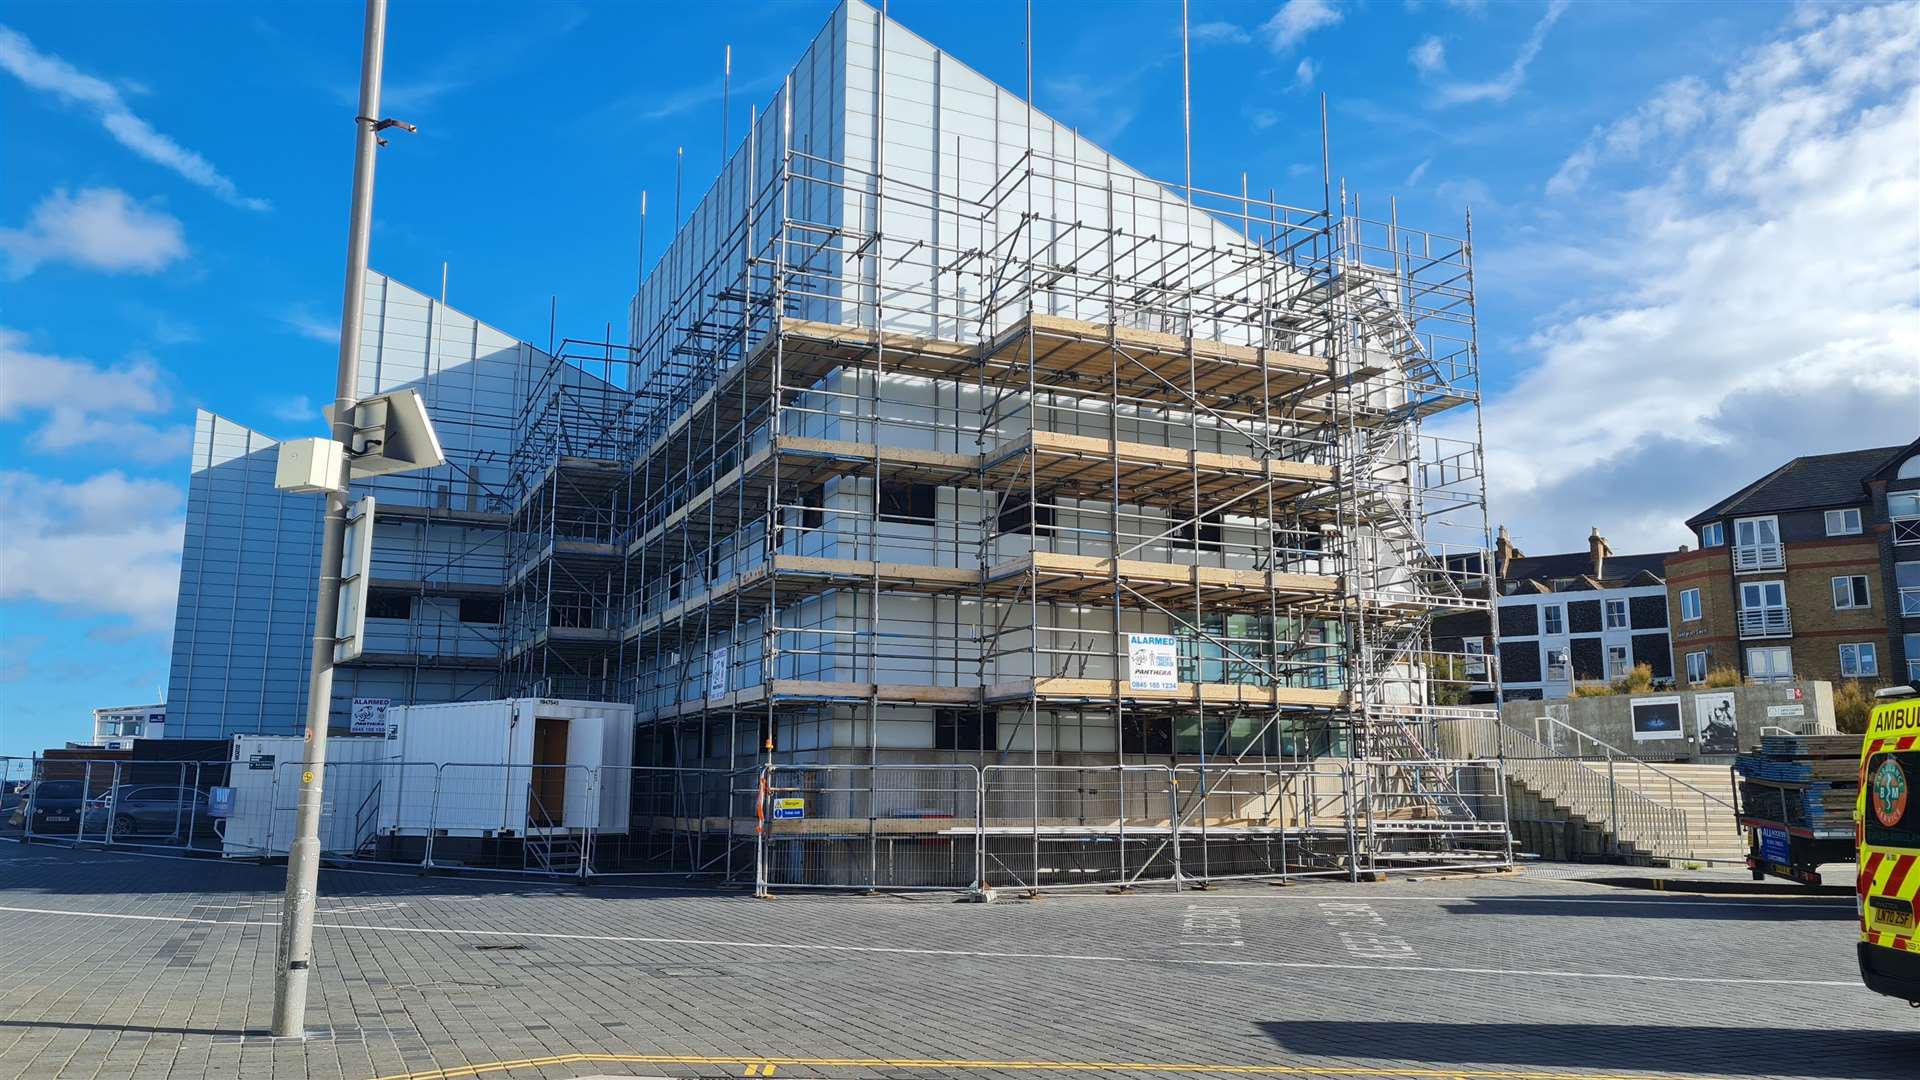 Margate's Turner Contemporary is undergoing restoration works